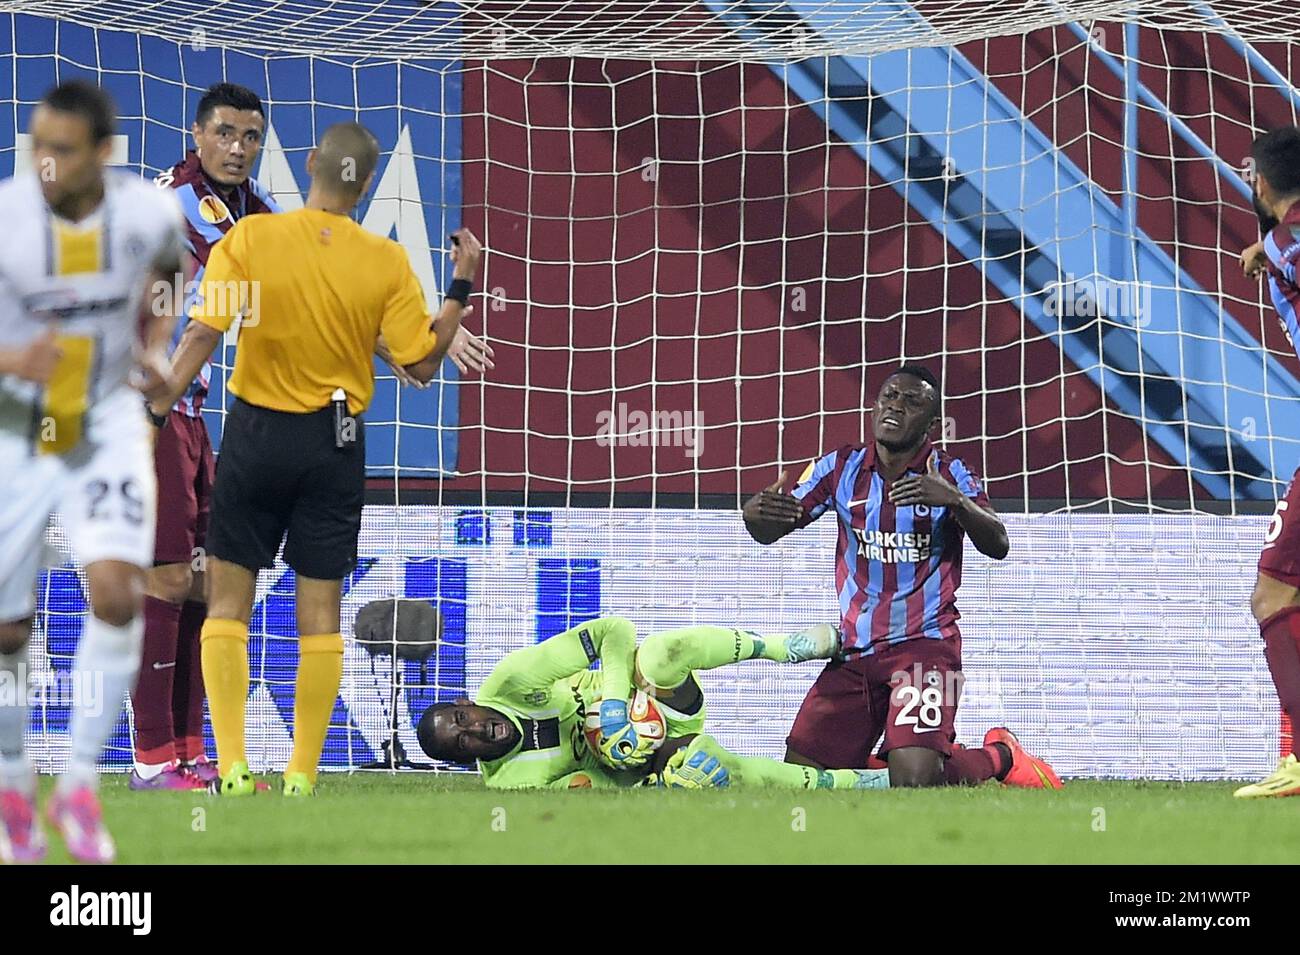 20141023 - TRABZON, TURKEY: Lokeren's goalkeeper Barry Boubacar Copa and Trabzonspor's Majeed Waris pictured during a game between Turkish club Trabzonspor AS and Belgian soccer team KSC Lokeren OVL in the Huseyin Avni Aker Stadium in Trabzon, Thursday 23 October 2014. It is the third day of the group stage of the UEFA Europa League competition, in group L. BELGA PHOTO YORICK JANSENS Stock Photo